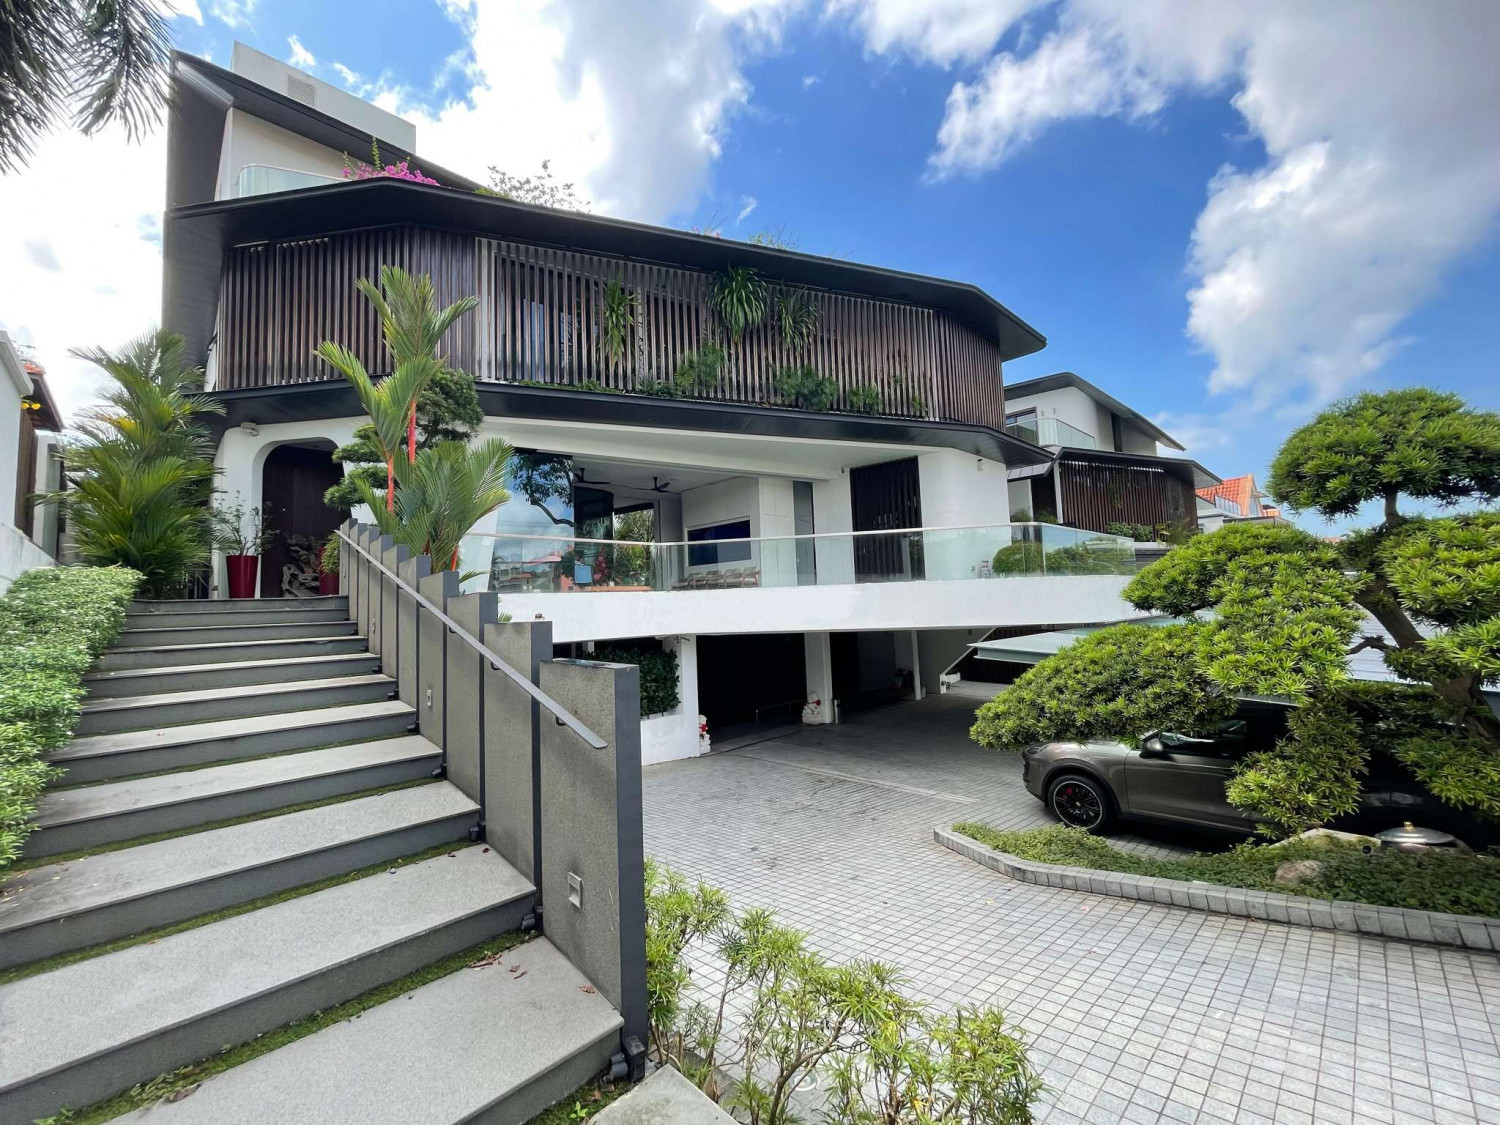 [UPDATE] La Salle Street bungalow for sale at $22 mil - Property News